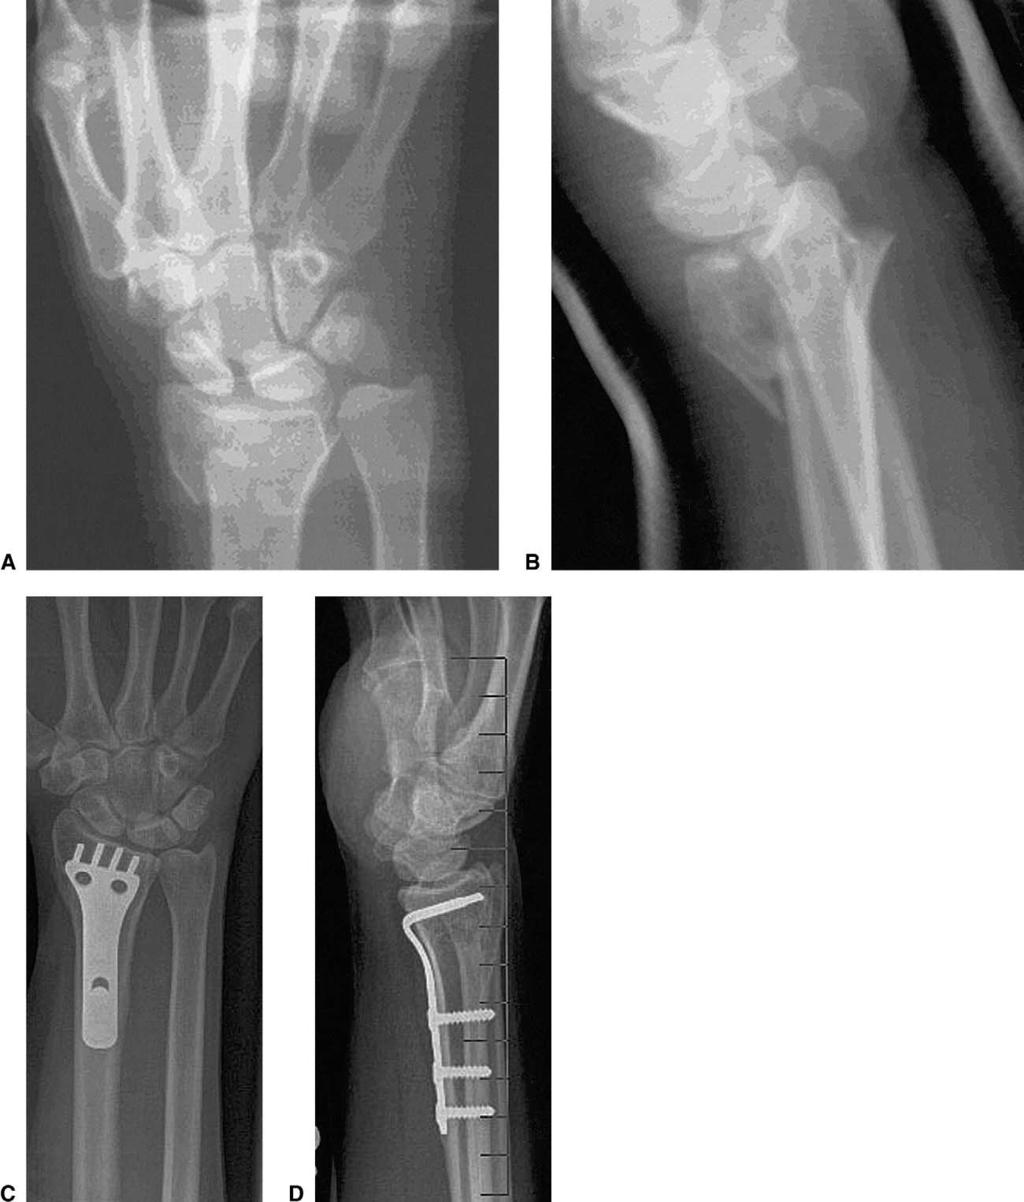 296 The Journal of Hand Surgery / Vol. 30A No. 2 March 2005 Figure 9. Patient with comminuted displaced intra-articular radius fracture with significant scapholunate injury.